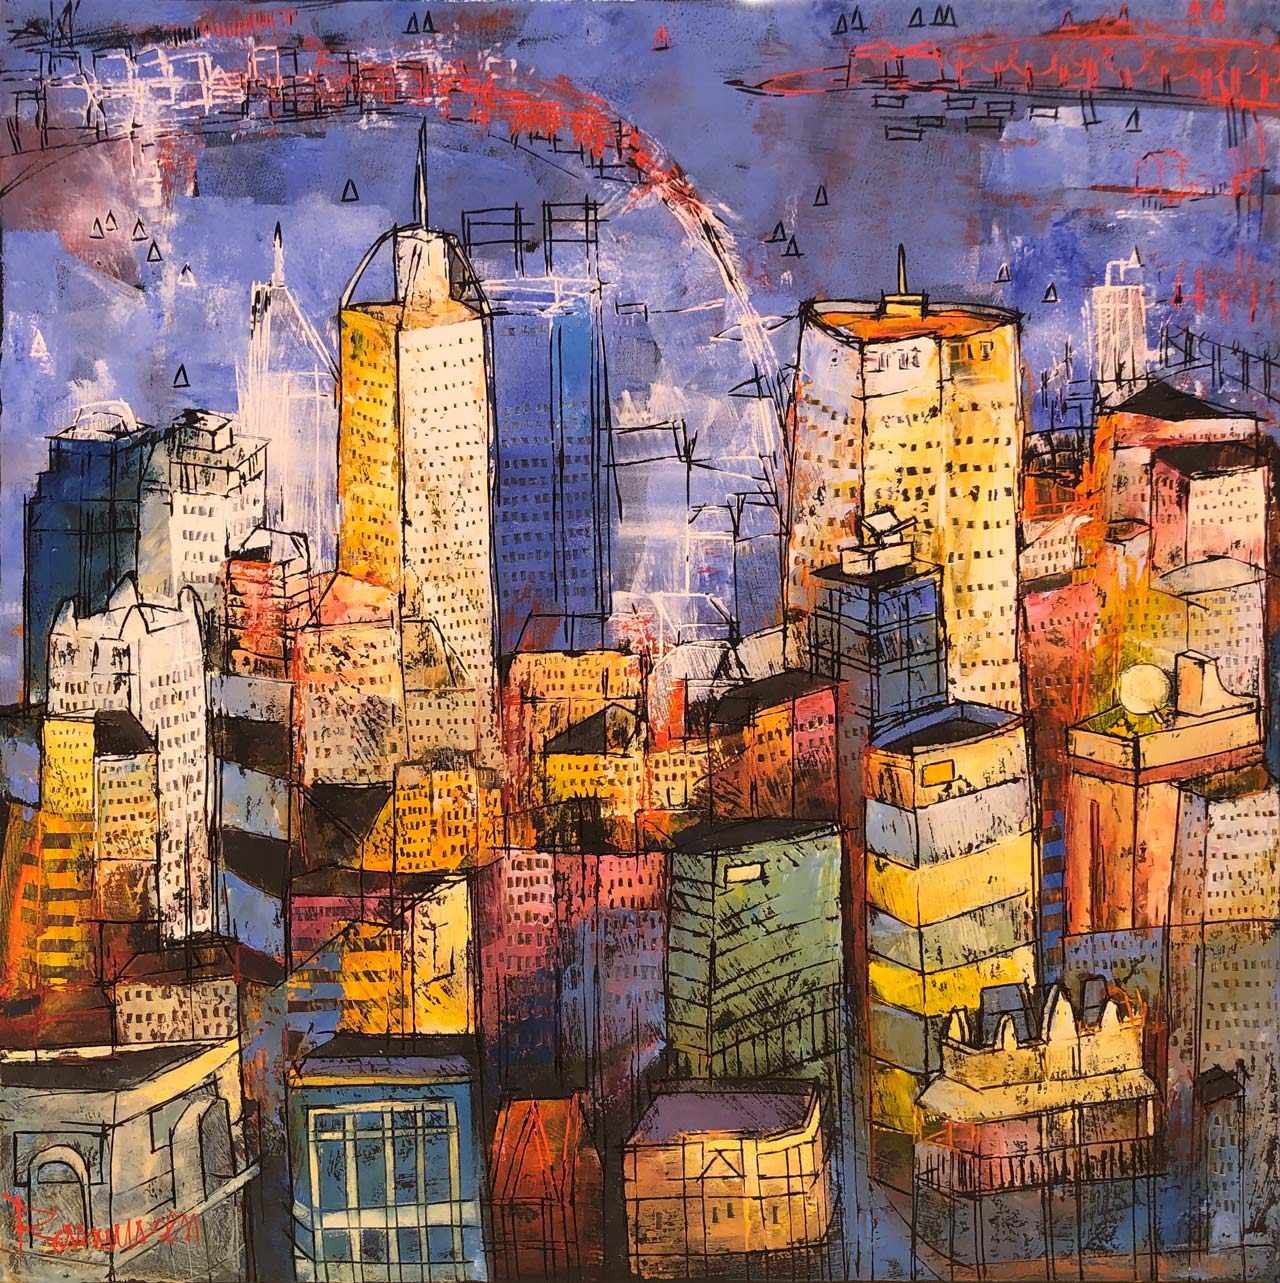 City Towers On The River by Ken Rasmussen Oil on Linen 61x61cm